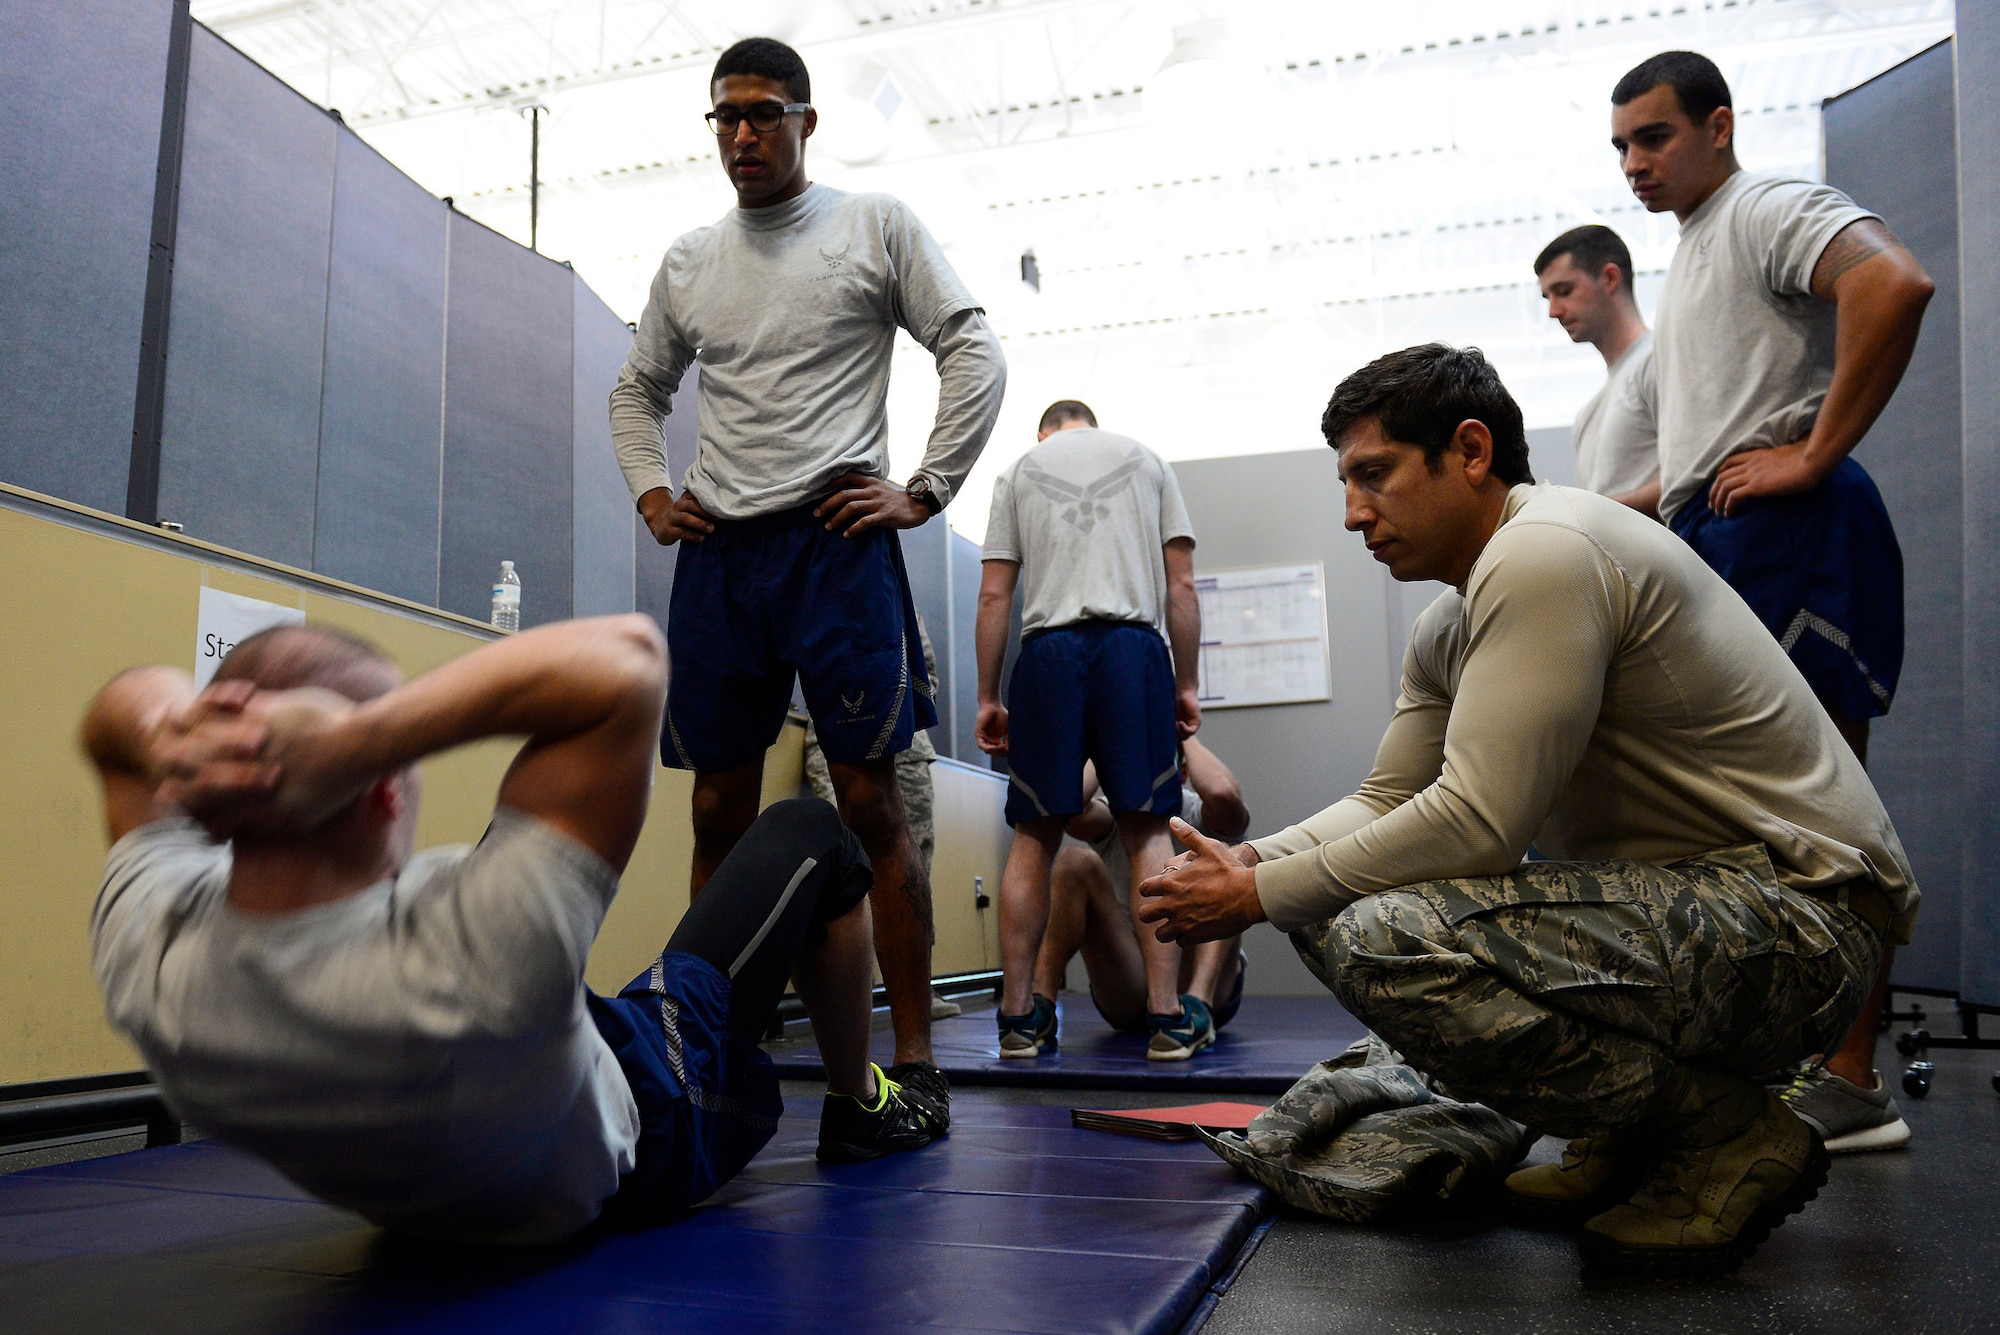 Master Sgt. Ismael Villegas, section chief of the Recruitment, Assesment and Selection program, administers a physical ability and stamina test at Shaw Air Force Base, S.C., Dec. 10, 2014. In a two-minute time frame, the Airmen had to perform a specified amount of sit-ups, push-ups, and pull-ups required by the specific Special Tactics career field they wished to enter. (U.S. Air Force photo by Airman 1st Class Diana M. Cossaboom/Released)